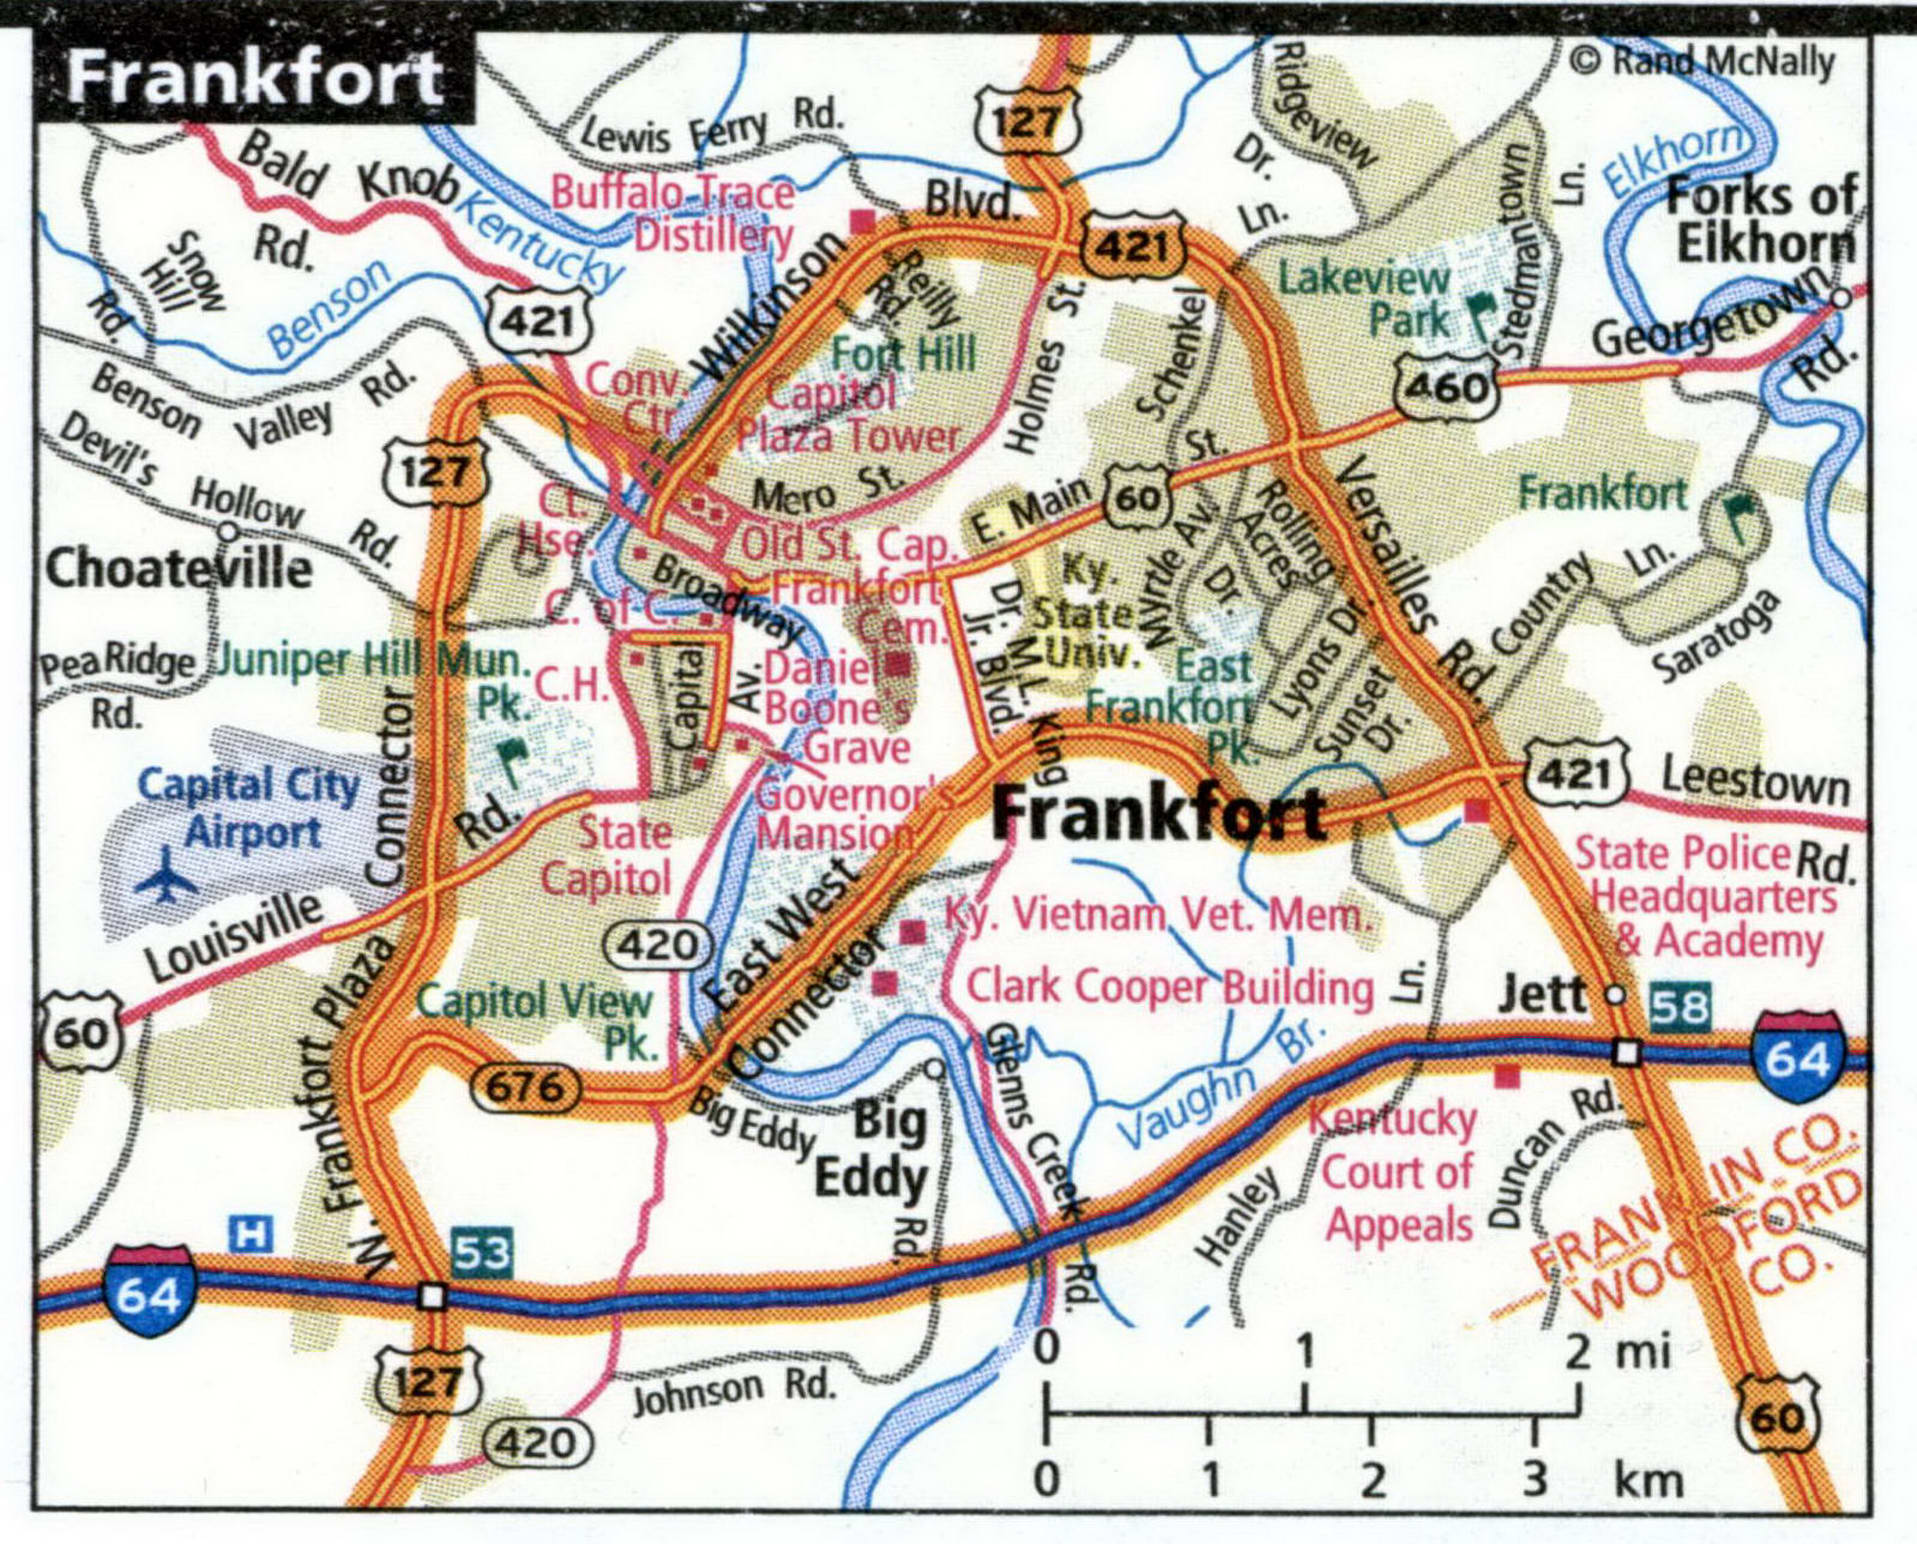 Frankfort map for truckers